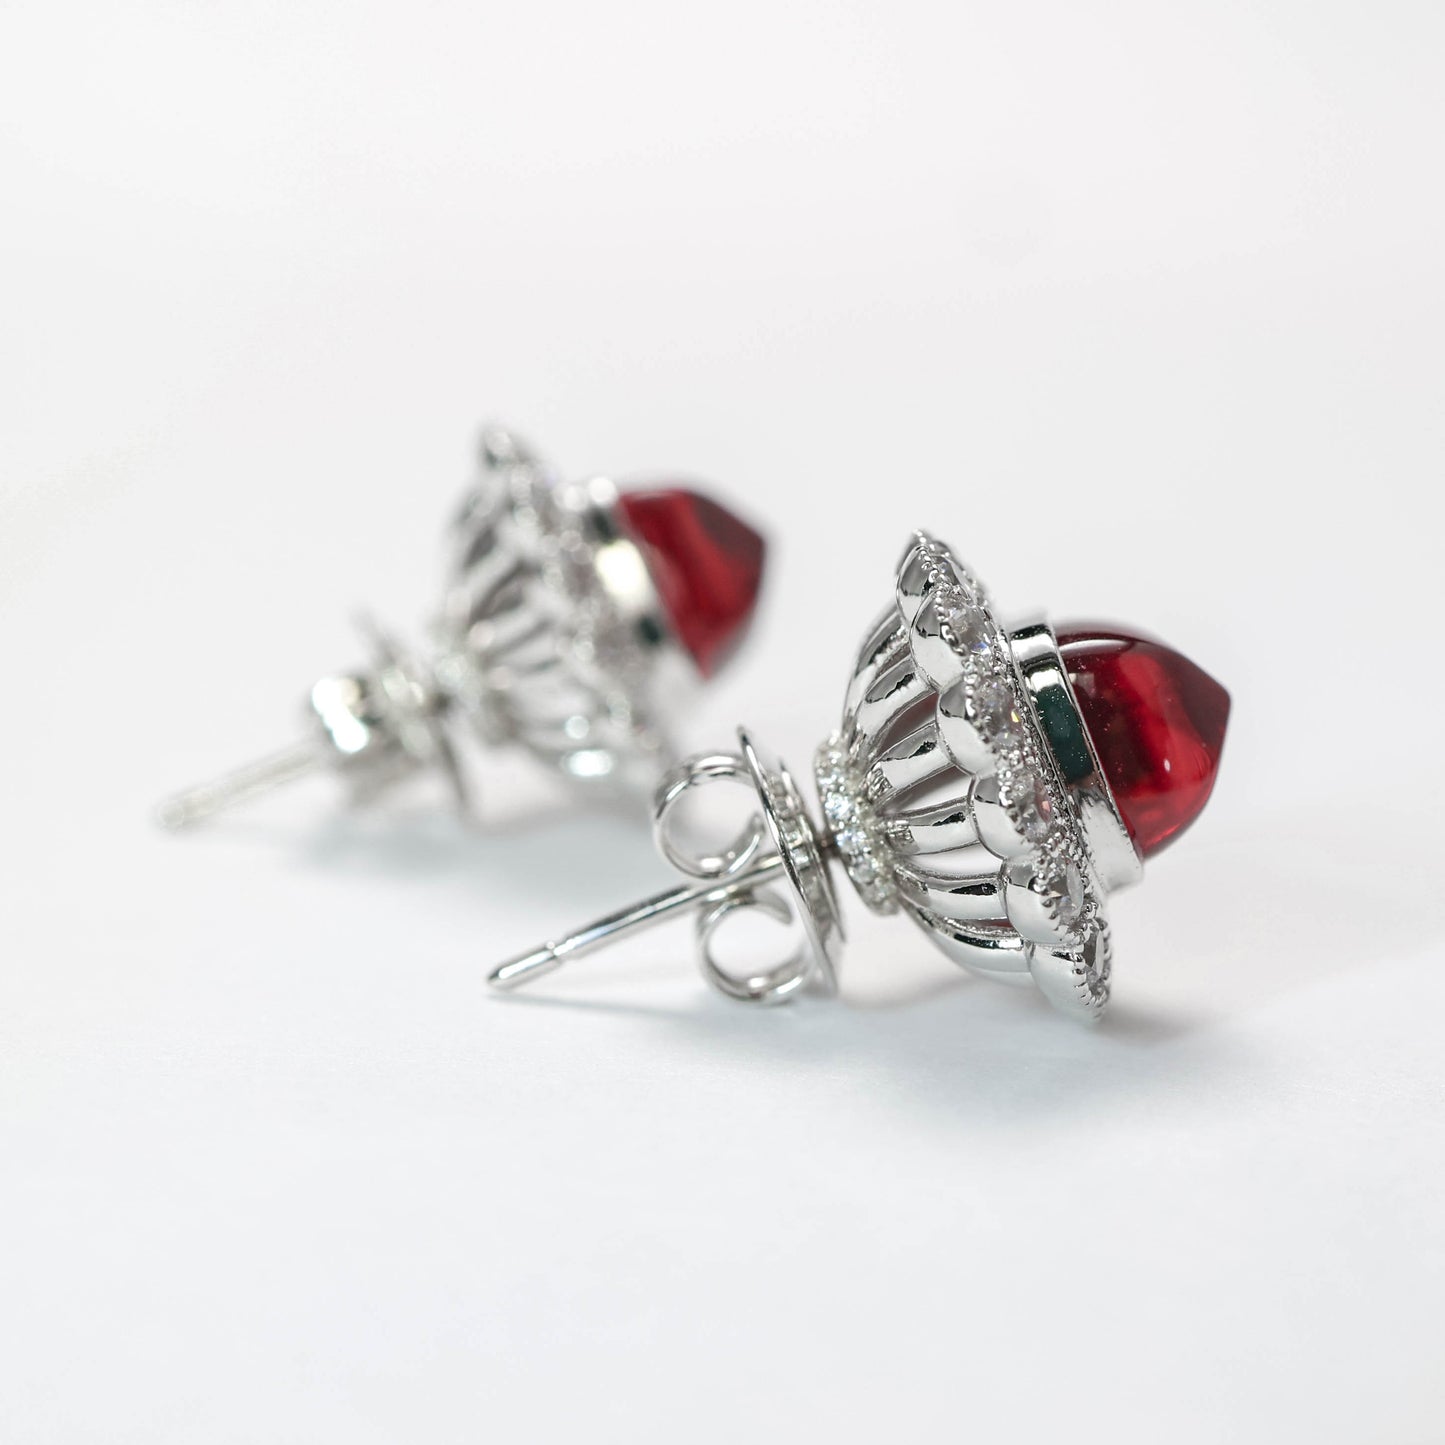 Micro-setting Ruby color Lab created stones sugar tower lace earrings, sterling silver